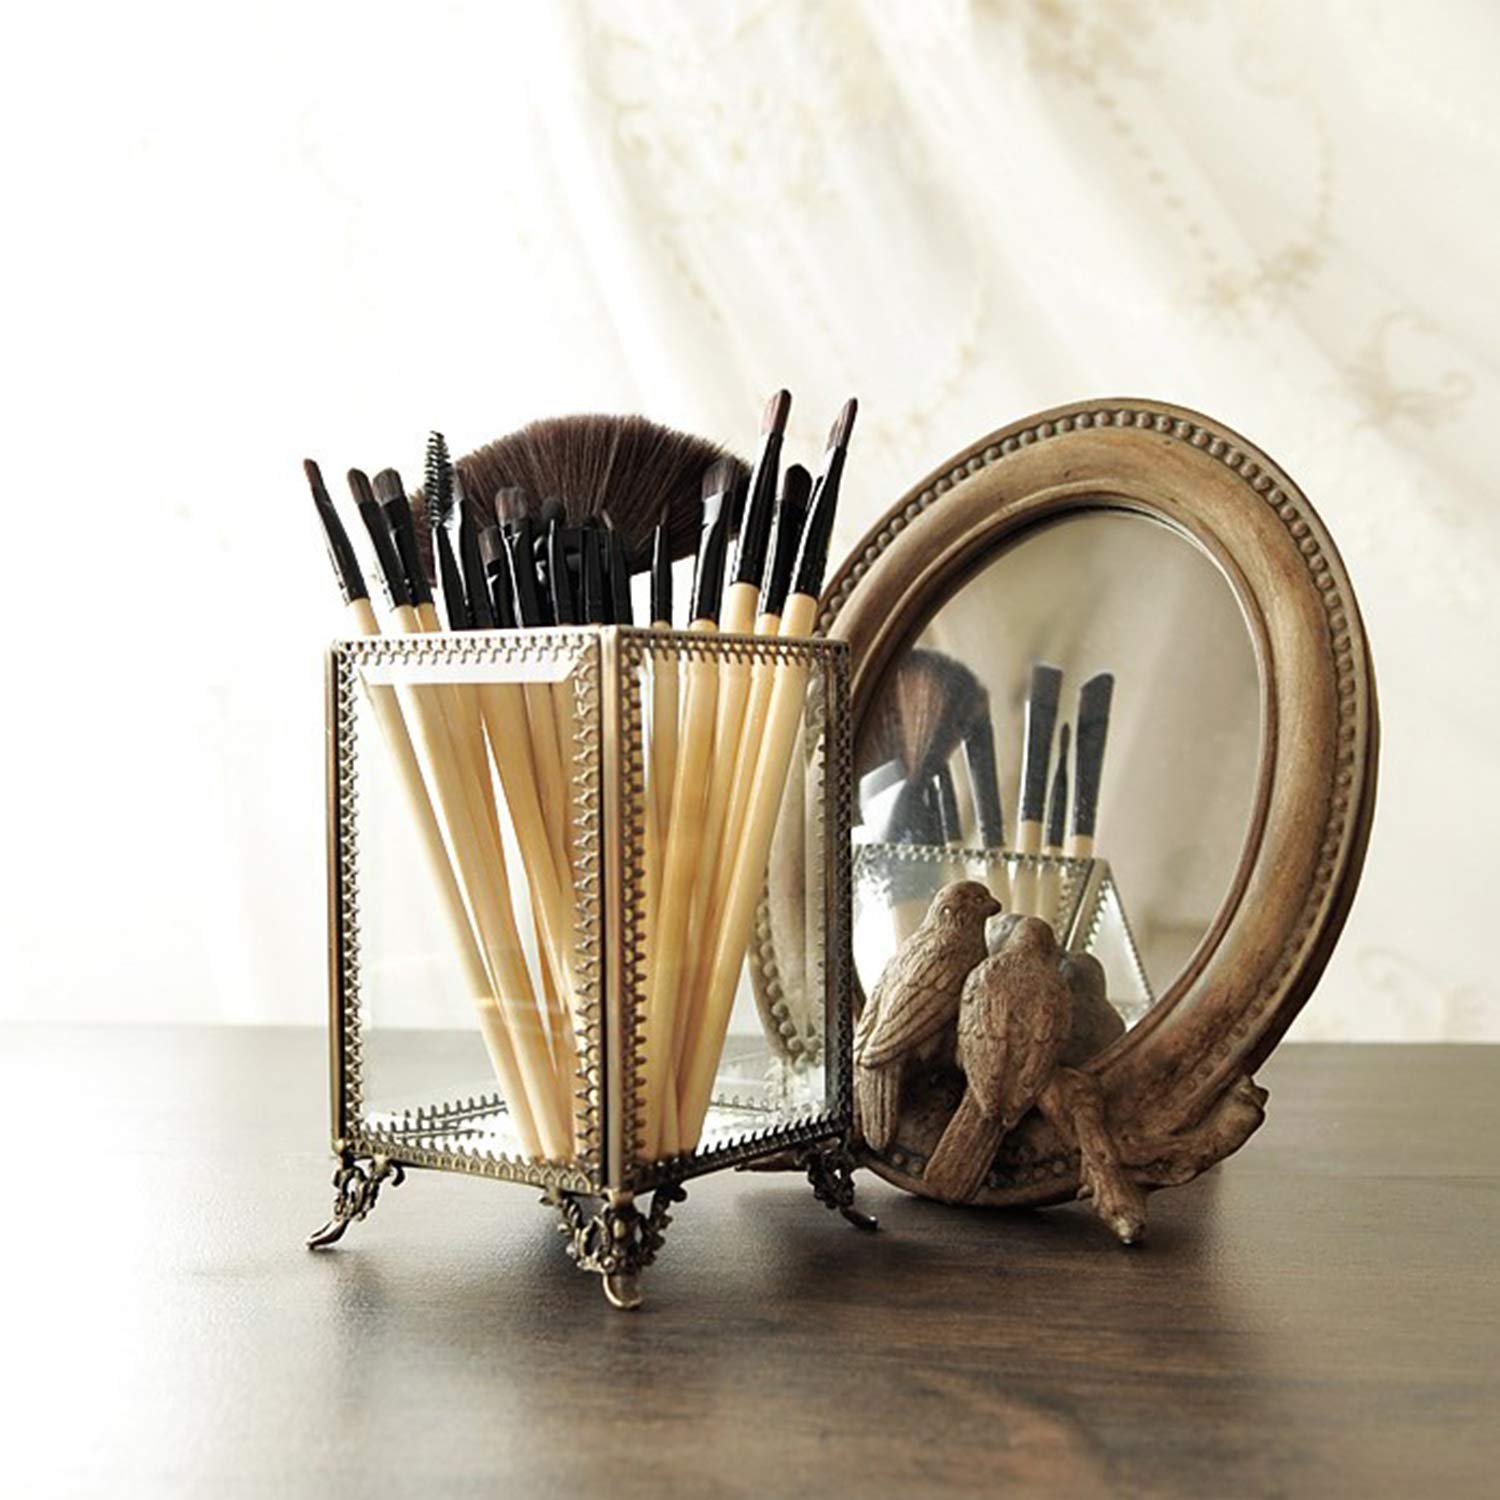 PuTwo Makeup Organizer Vintage Make up Brush Holder with Free White Pearls - Small